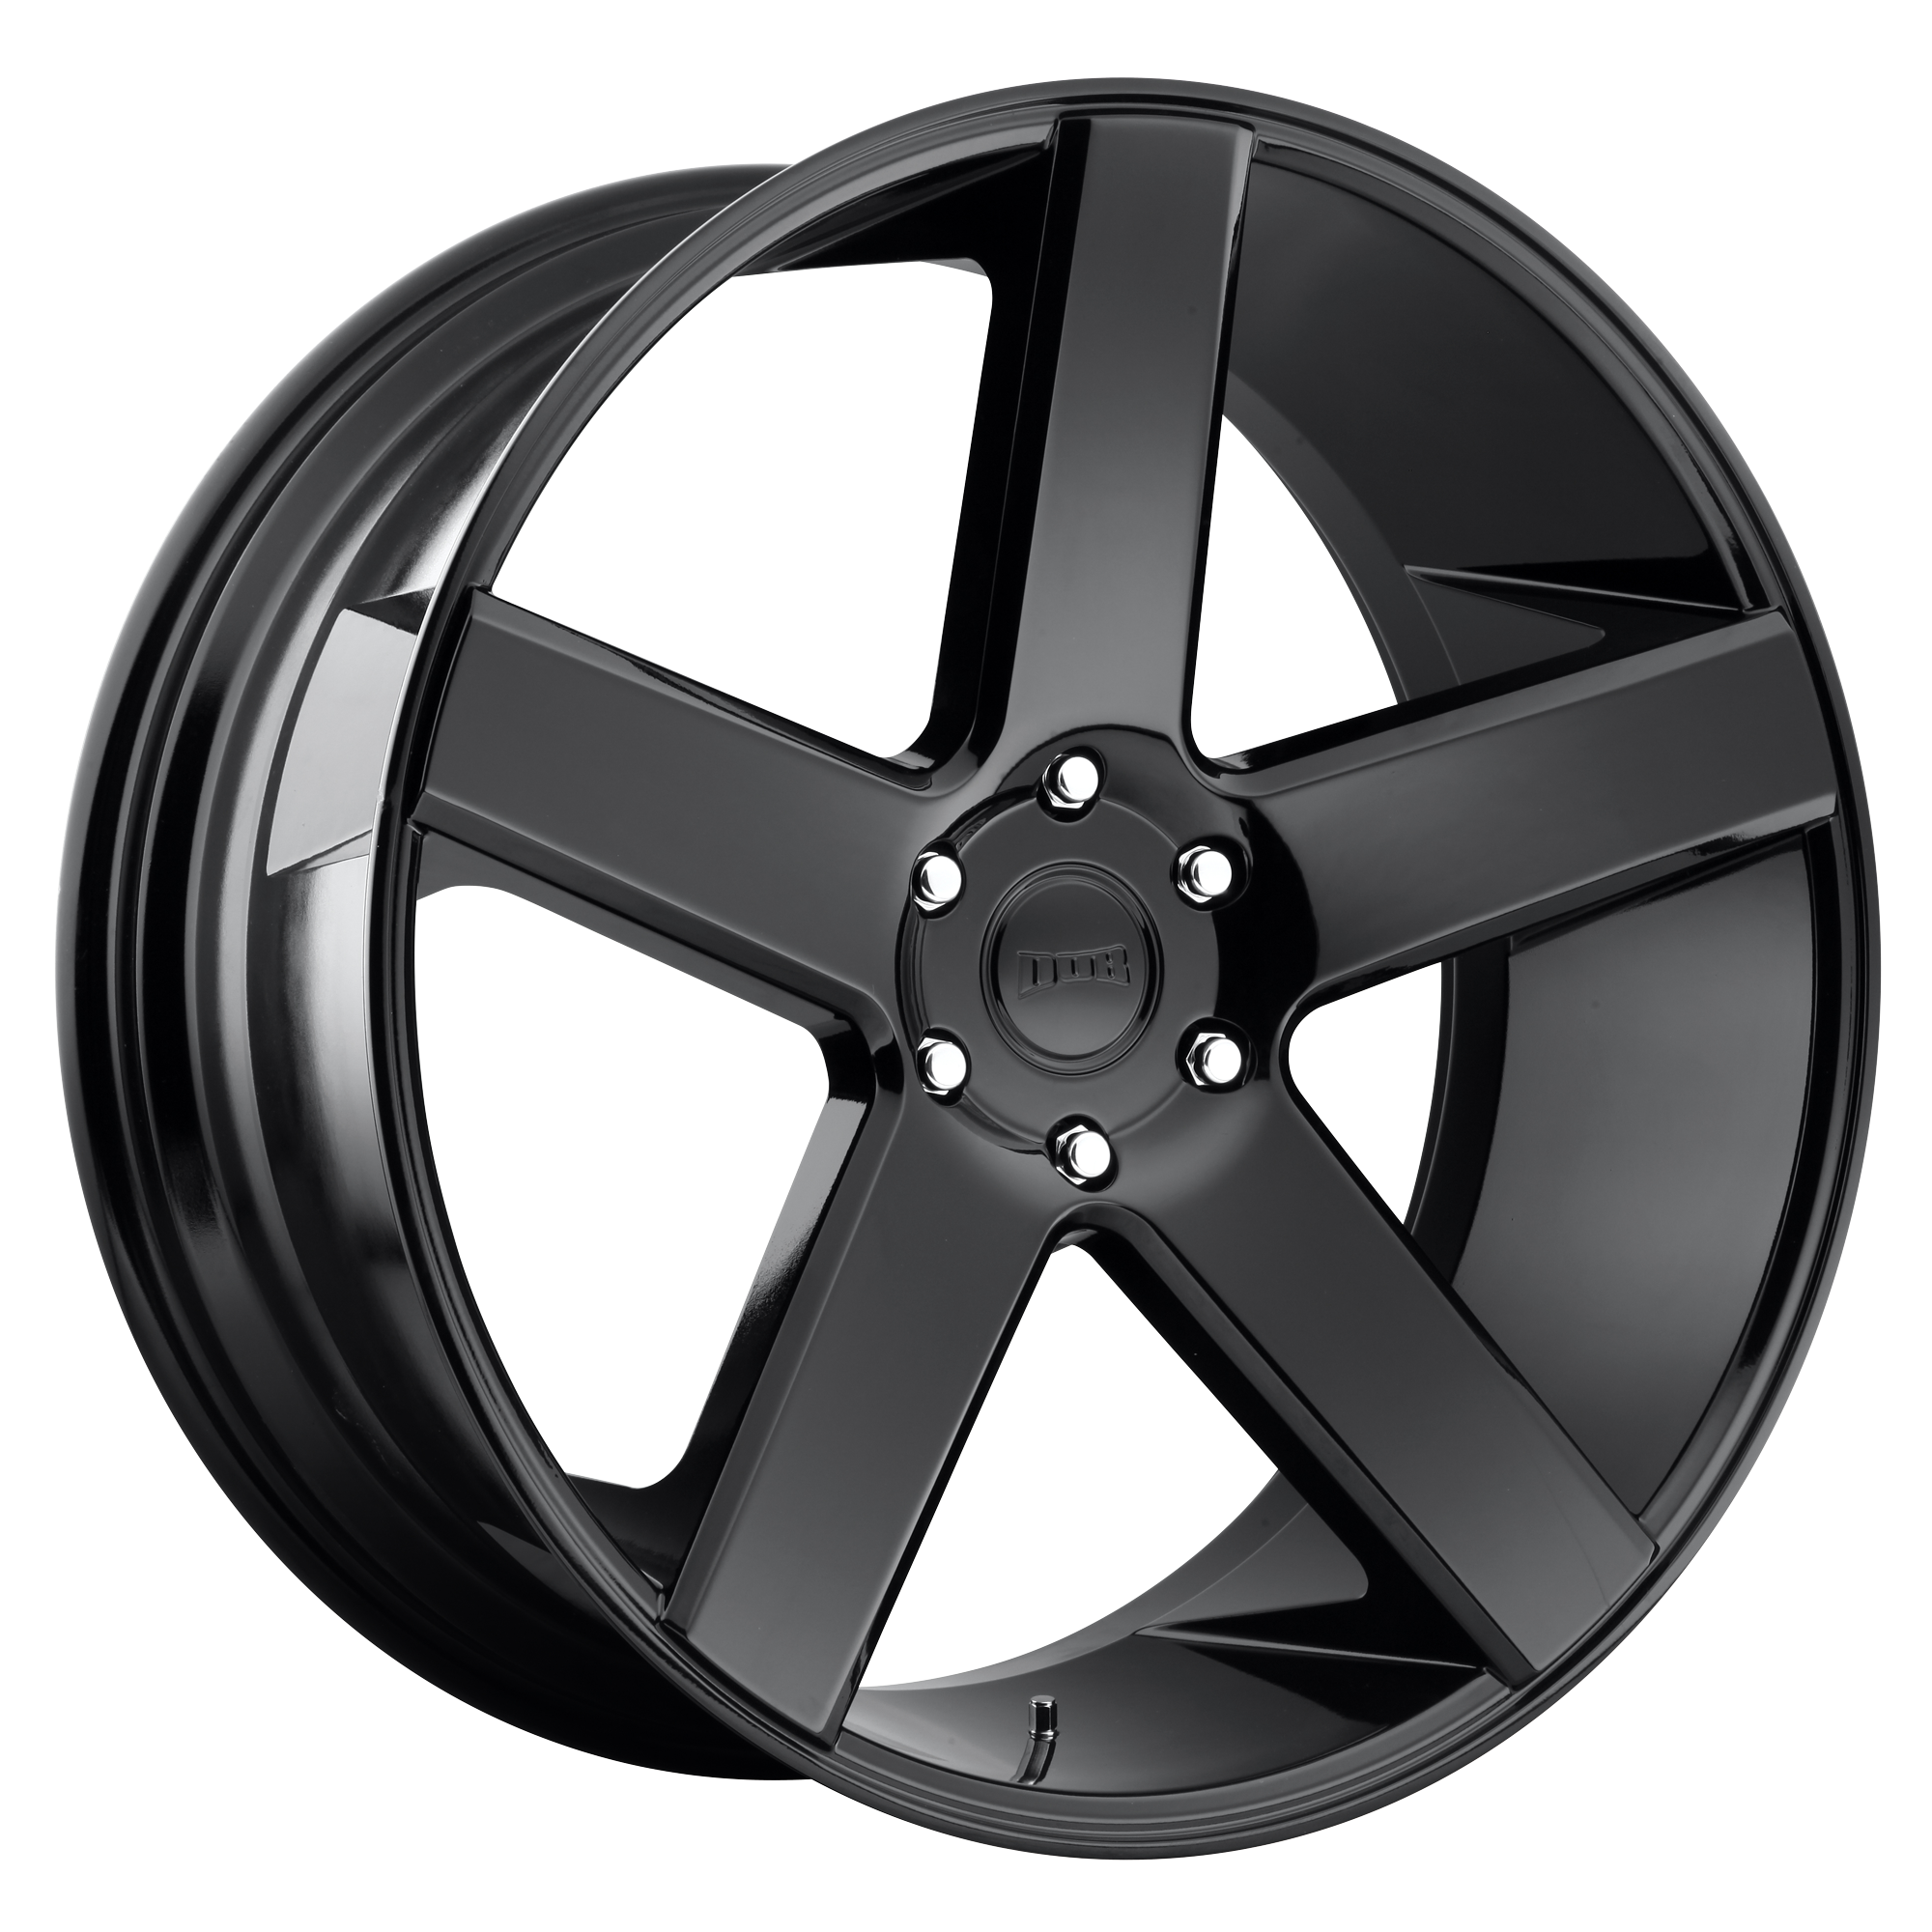 BALLER 24x9 5x115.00 GLOSS BLACK (15 mm) - Tires and Engine Performance